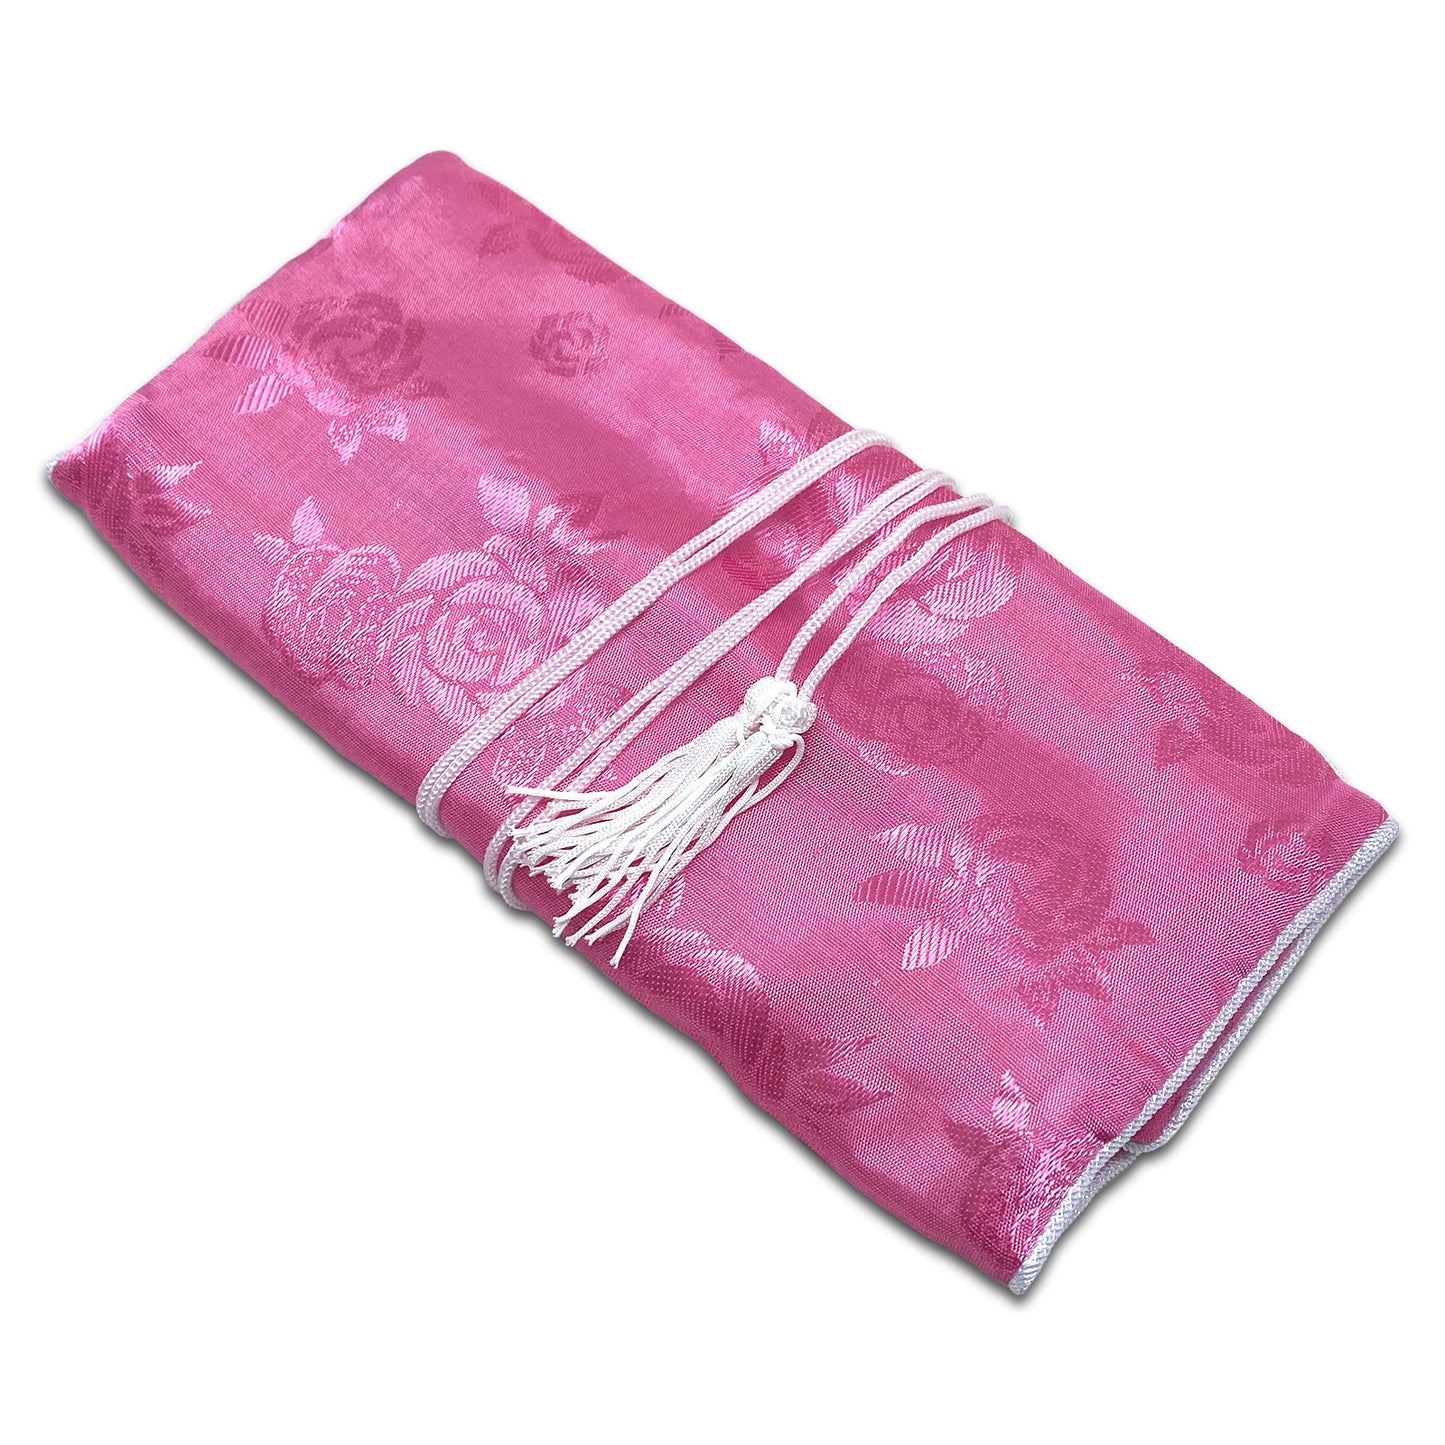 11 1/2" x 8 1/2" Pink Floral Pattern Jewelry Case Roll